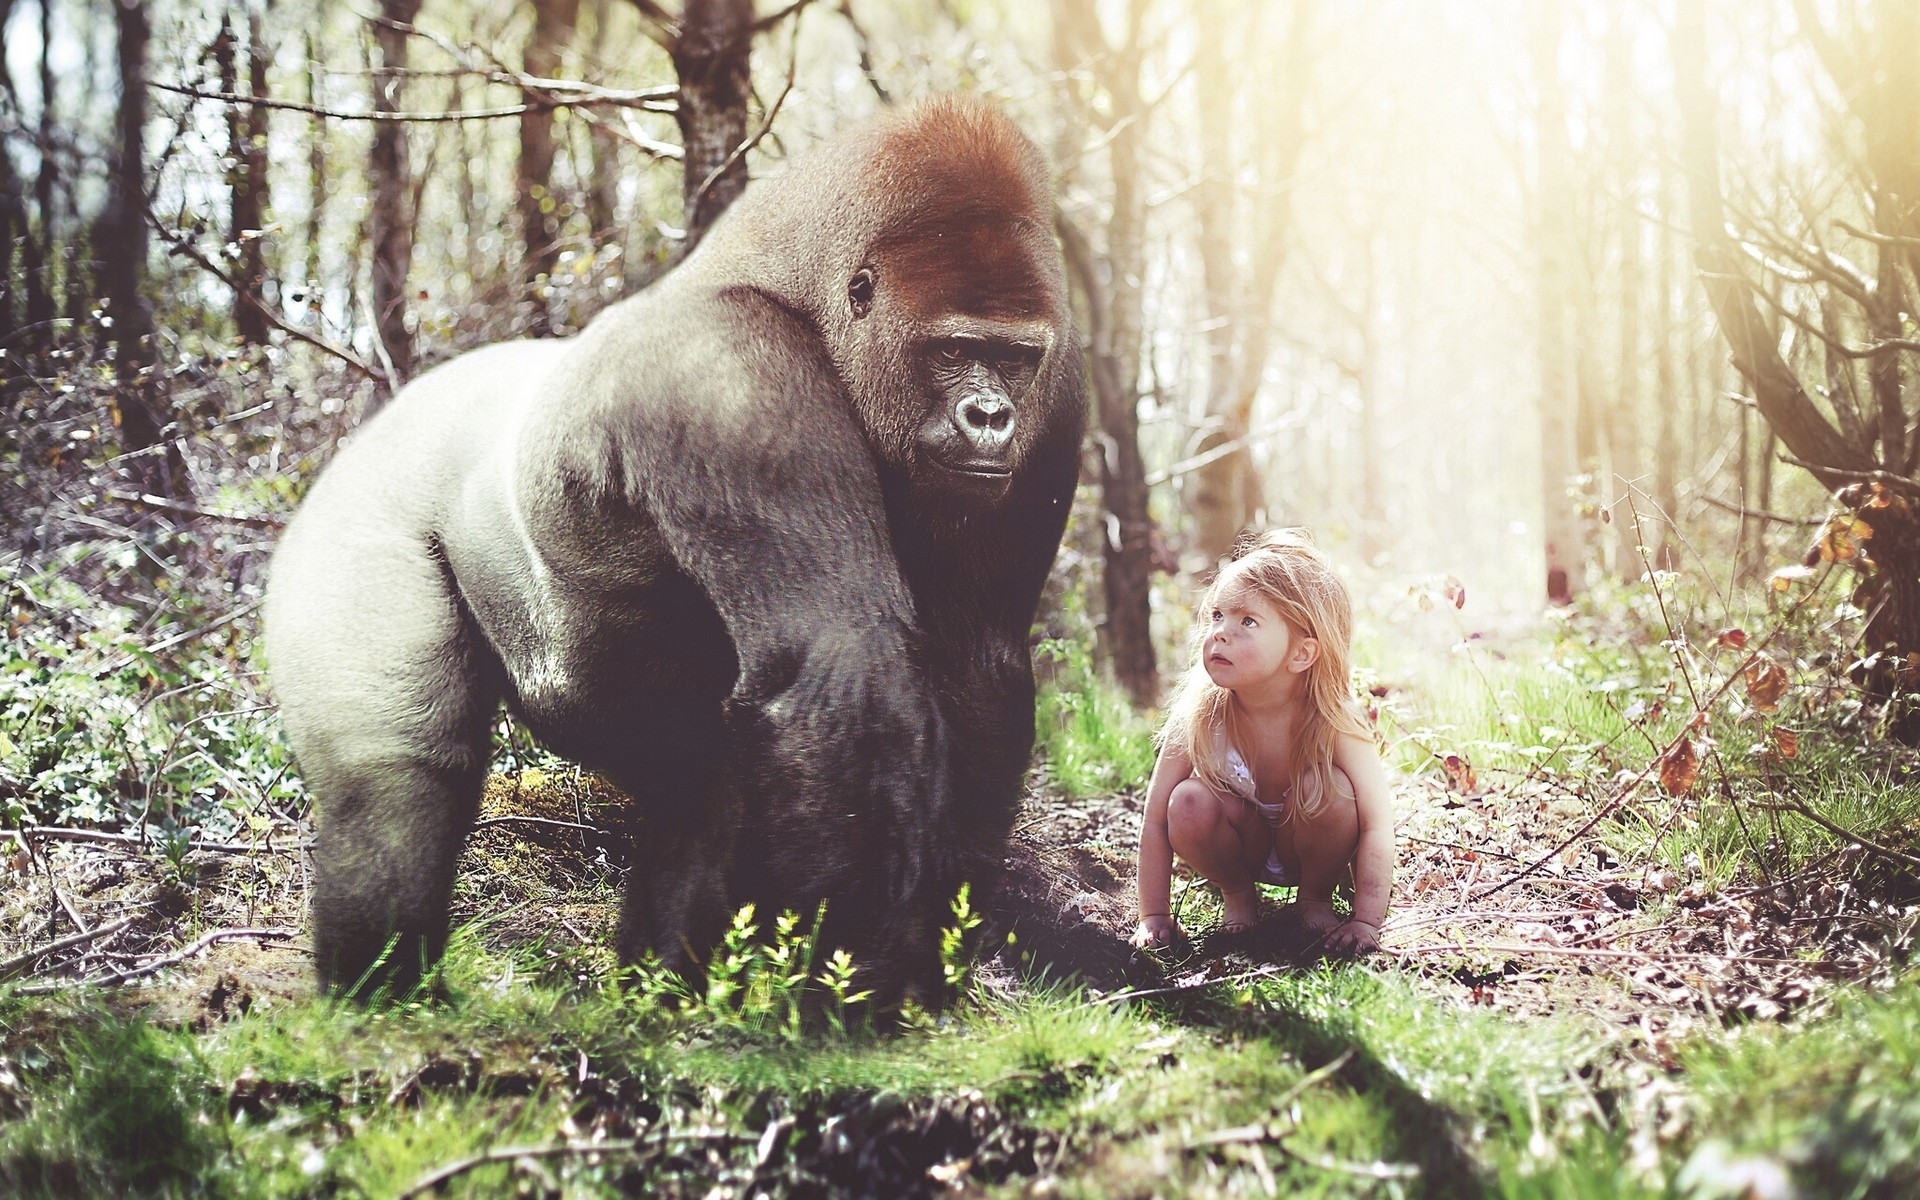 1920x1200 Gorilla girl monkey forest situation girls humor funny cute wallpaper |   | 84802 | WallpaperUP